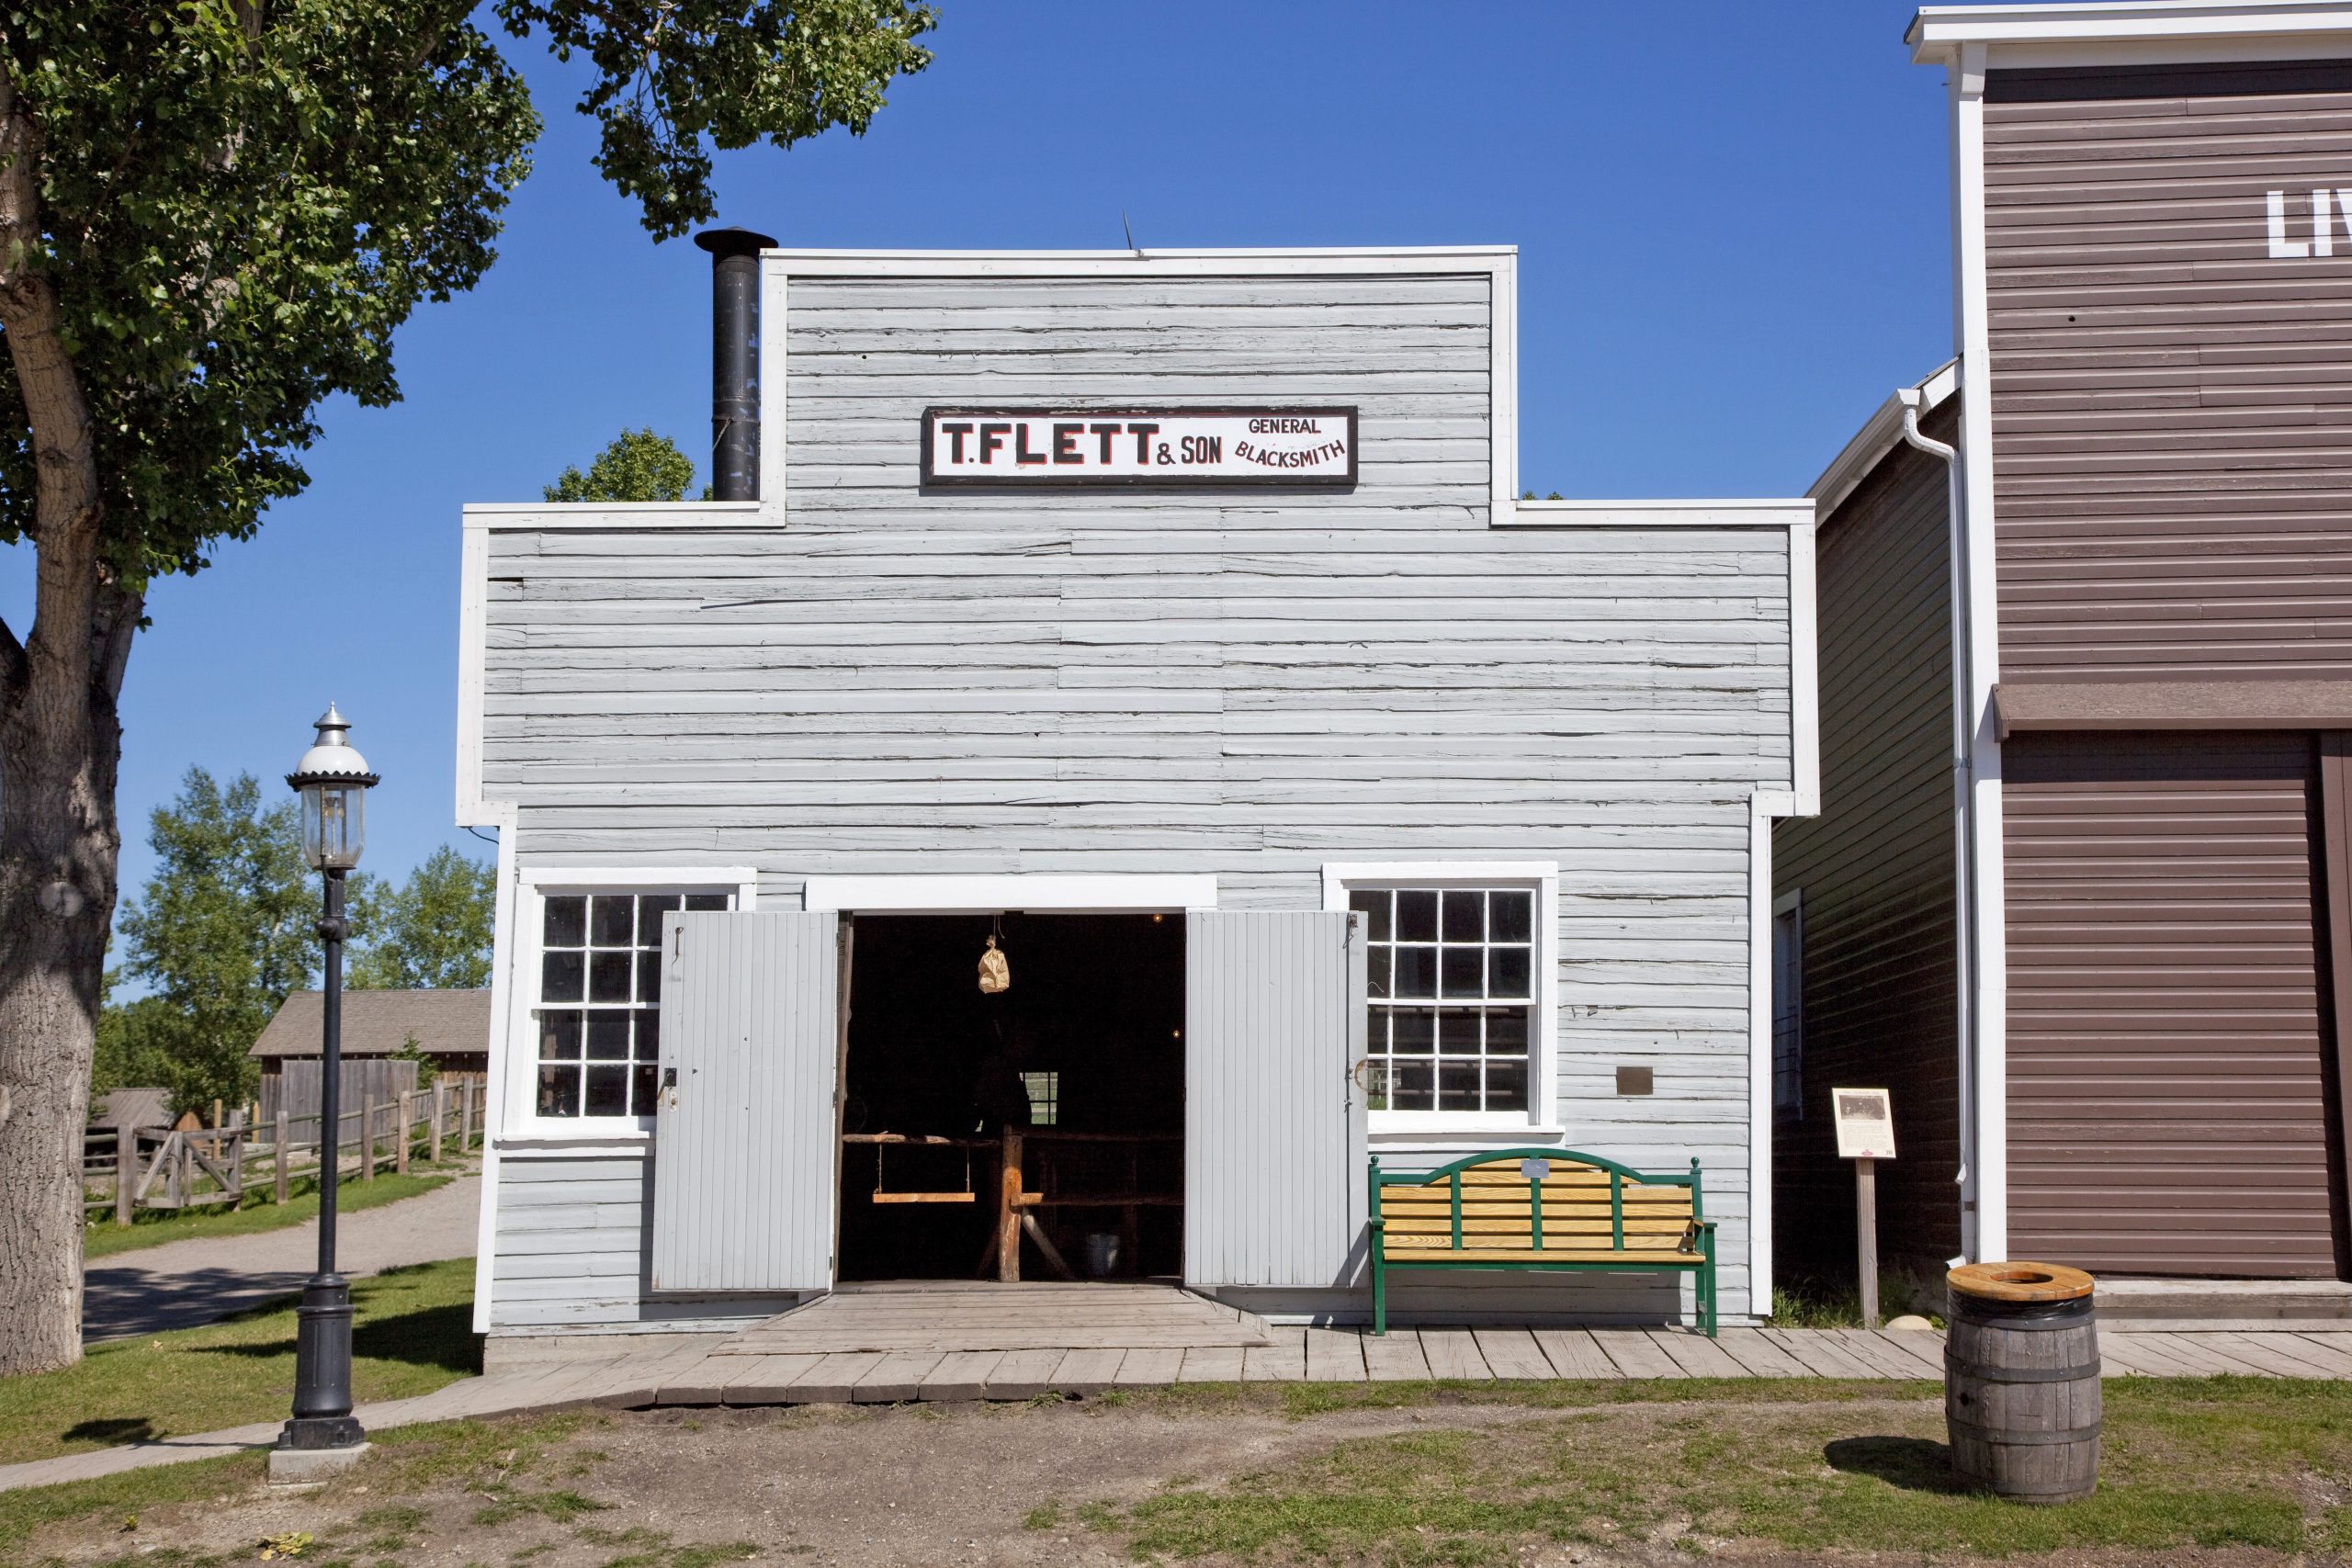 Flett's Blacksmith Shop, located in the Historical Village at Heritage Park